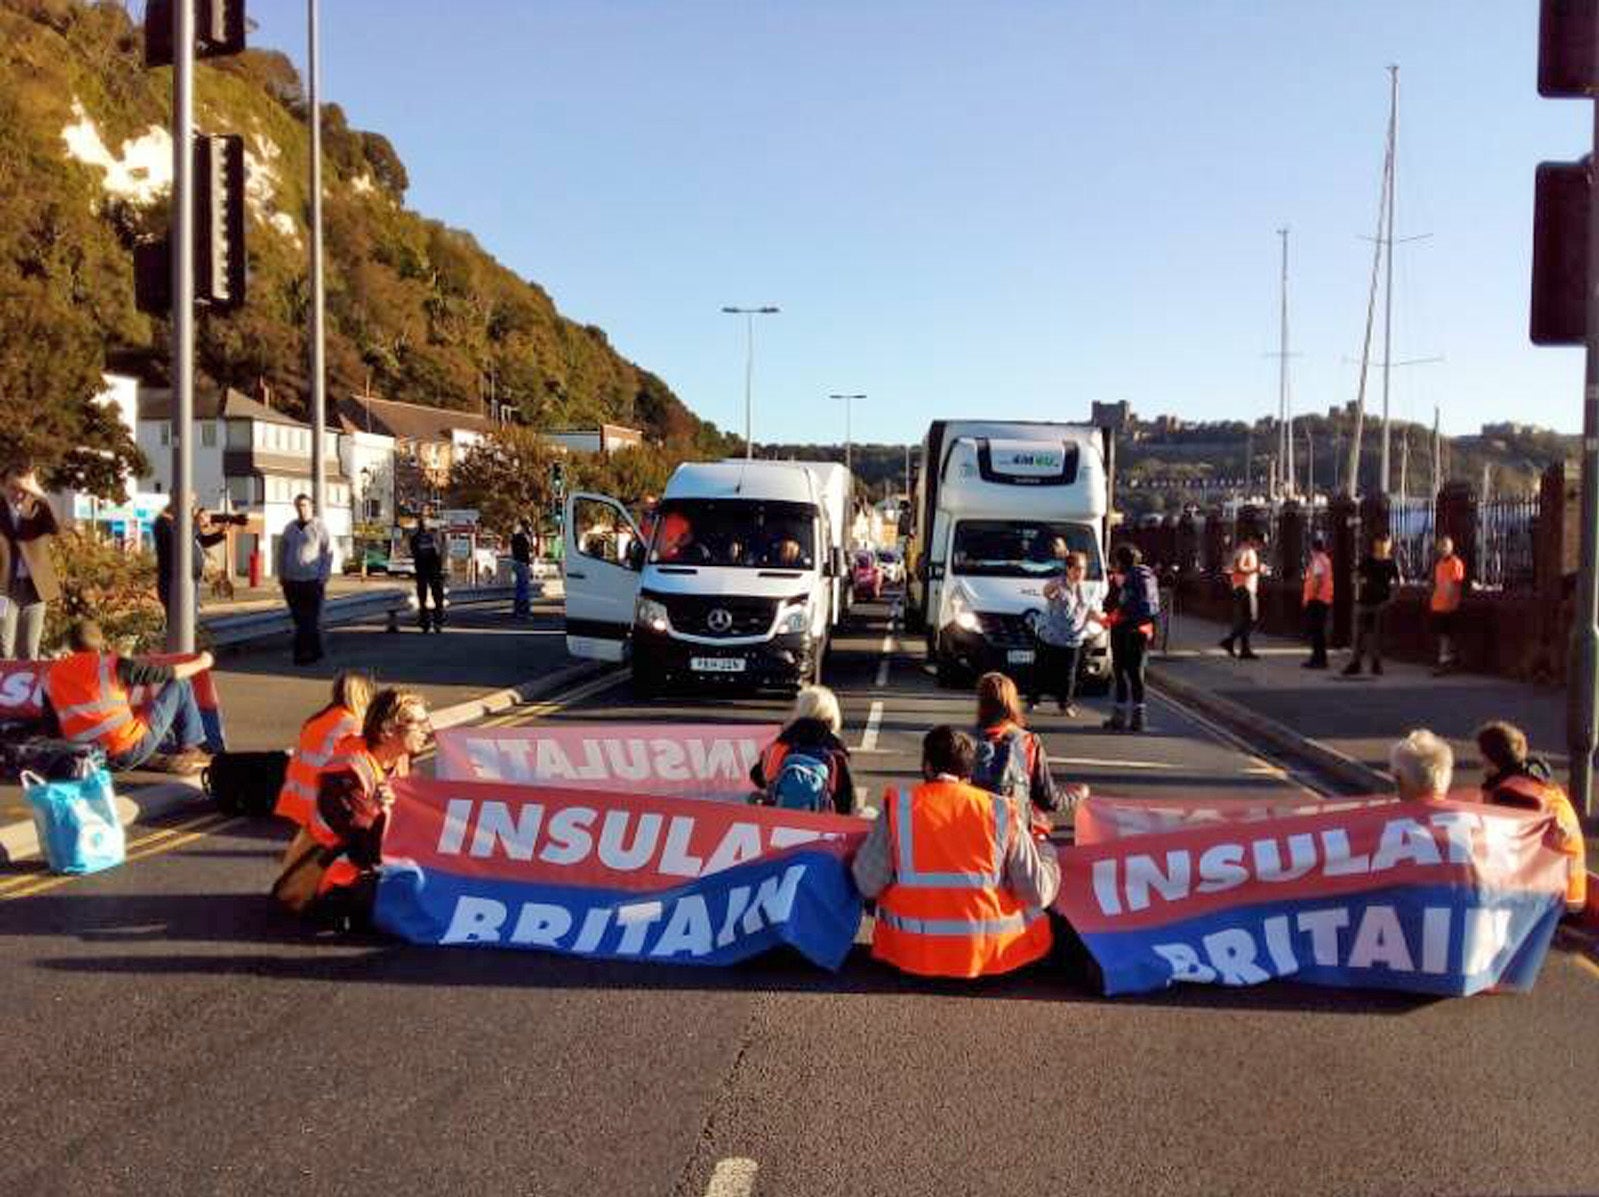 Insulate Britain protesters block the A20 which provides access to the Port of Dover in Kent